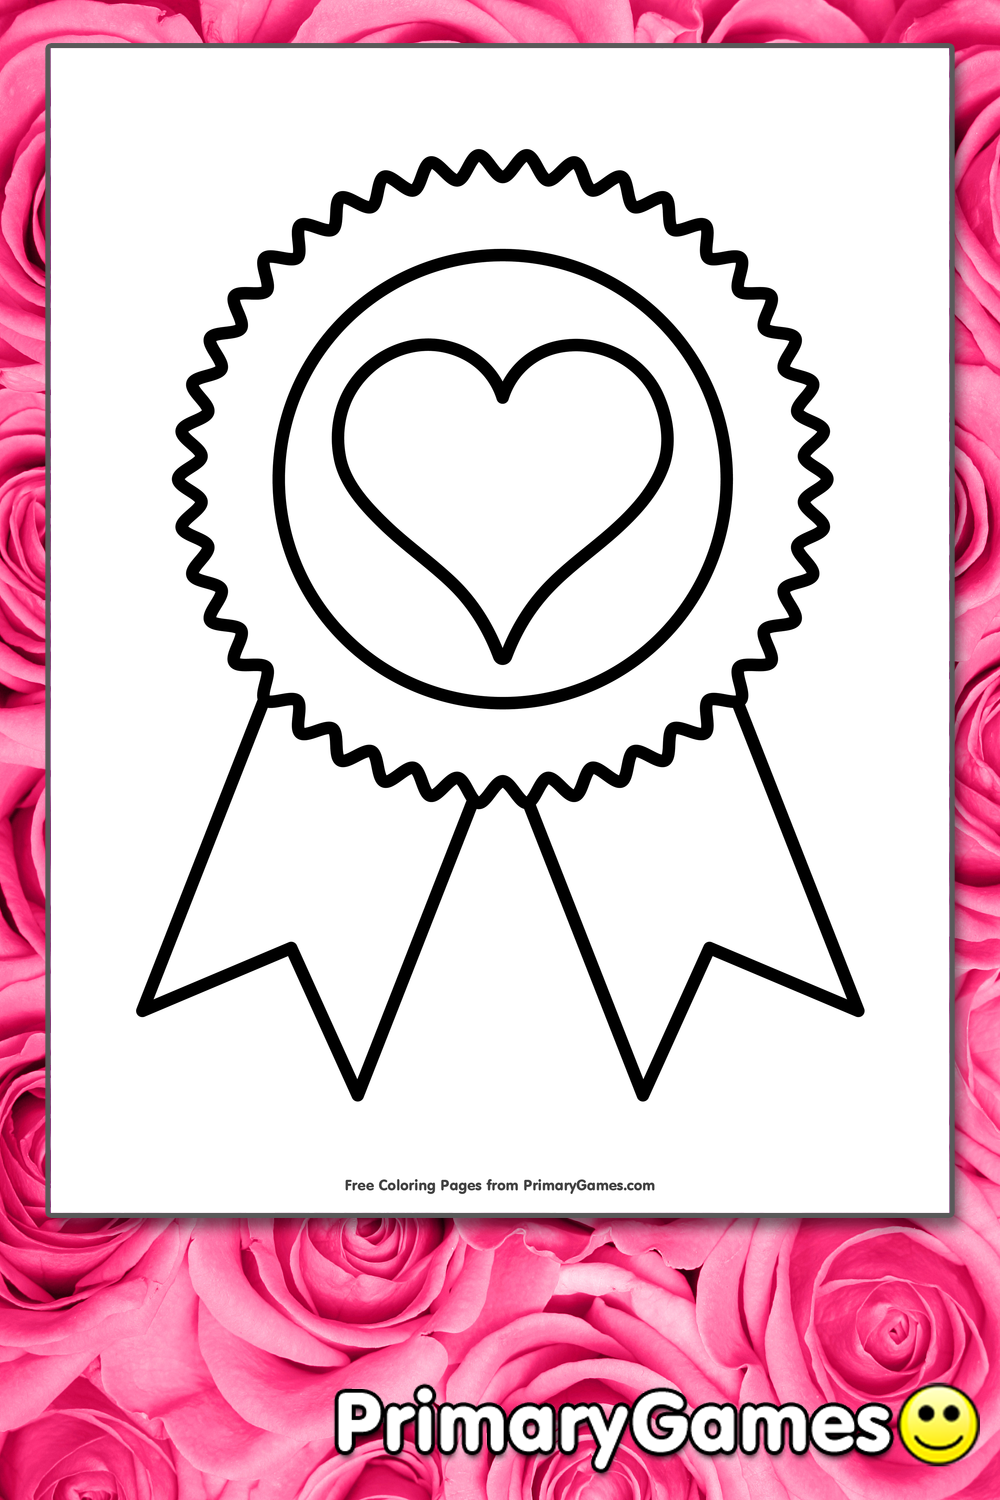 hearts with ribbons coloring pages